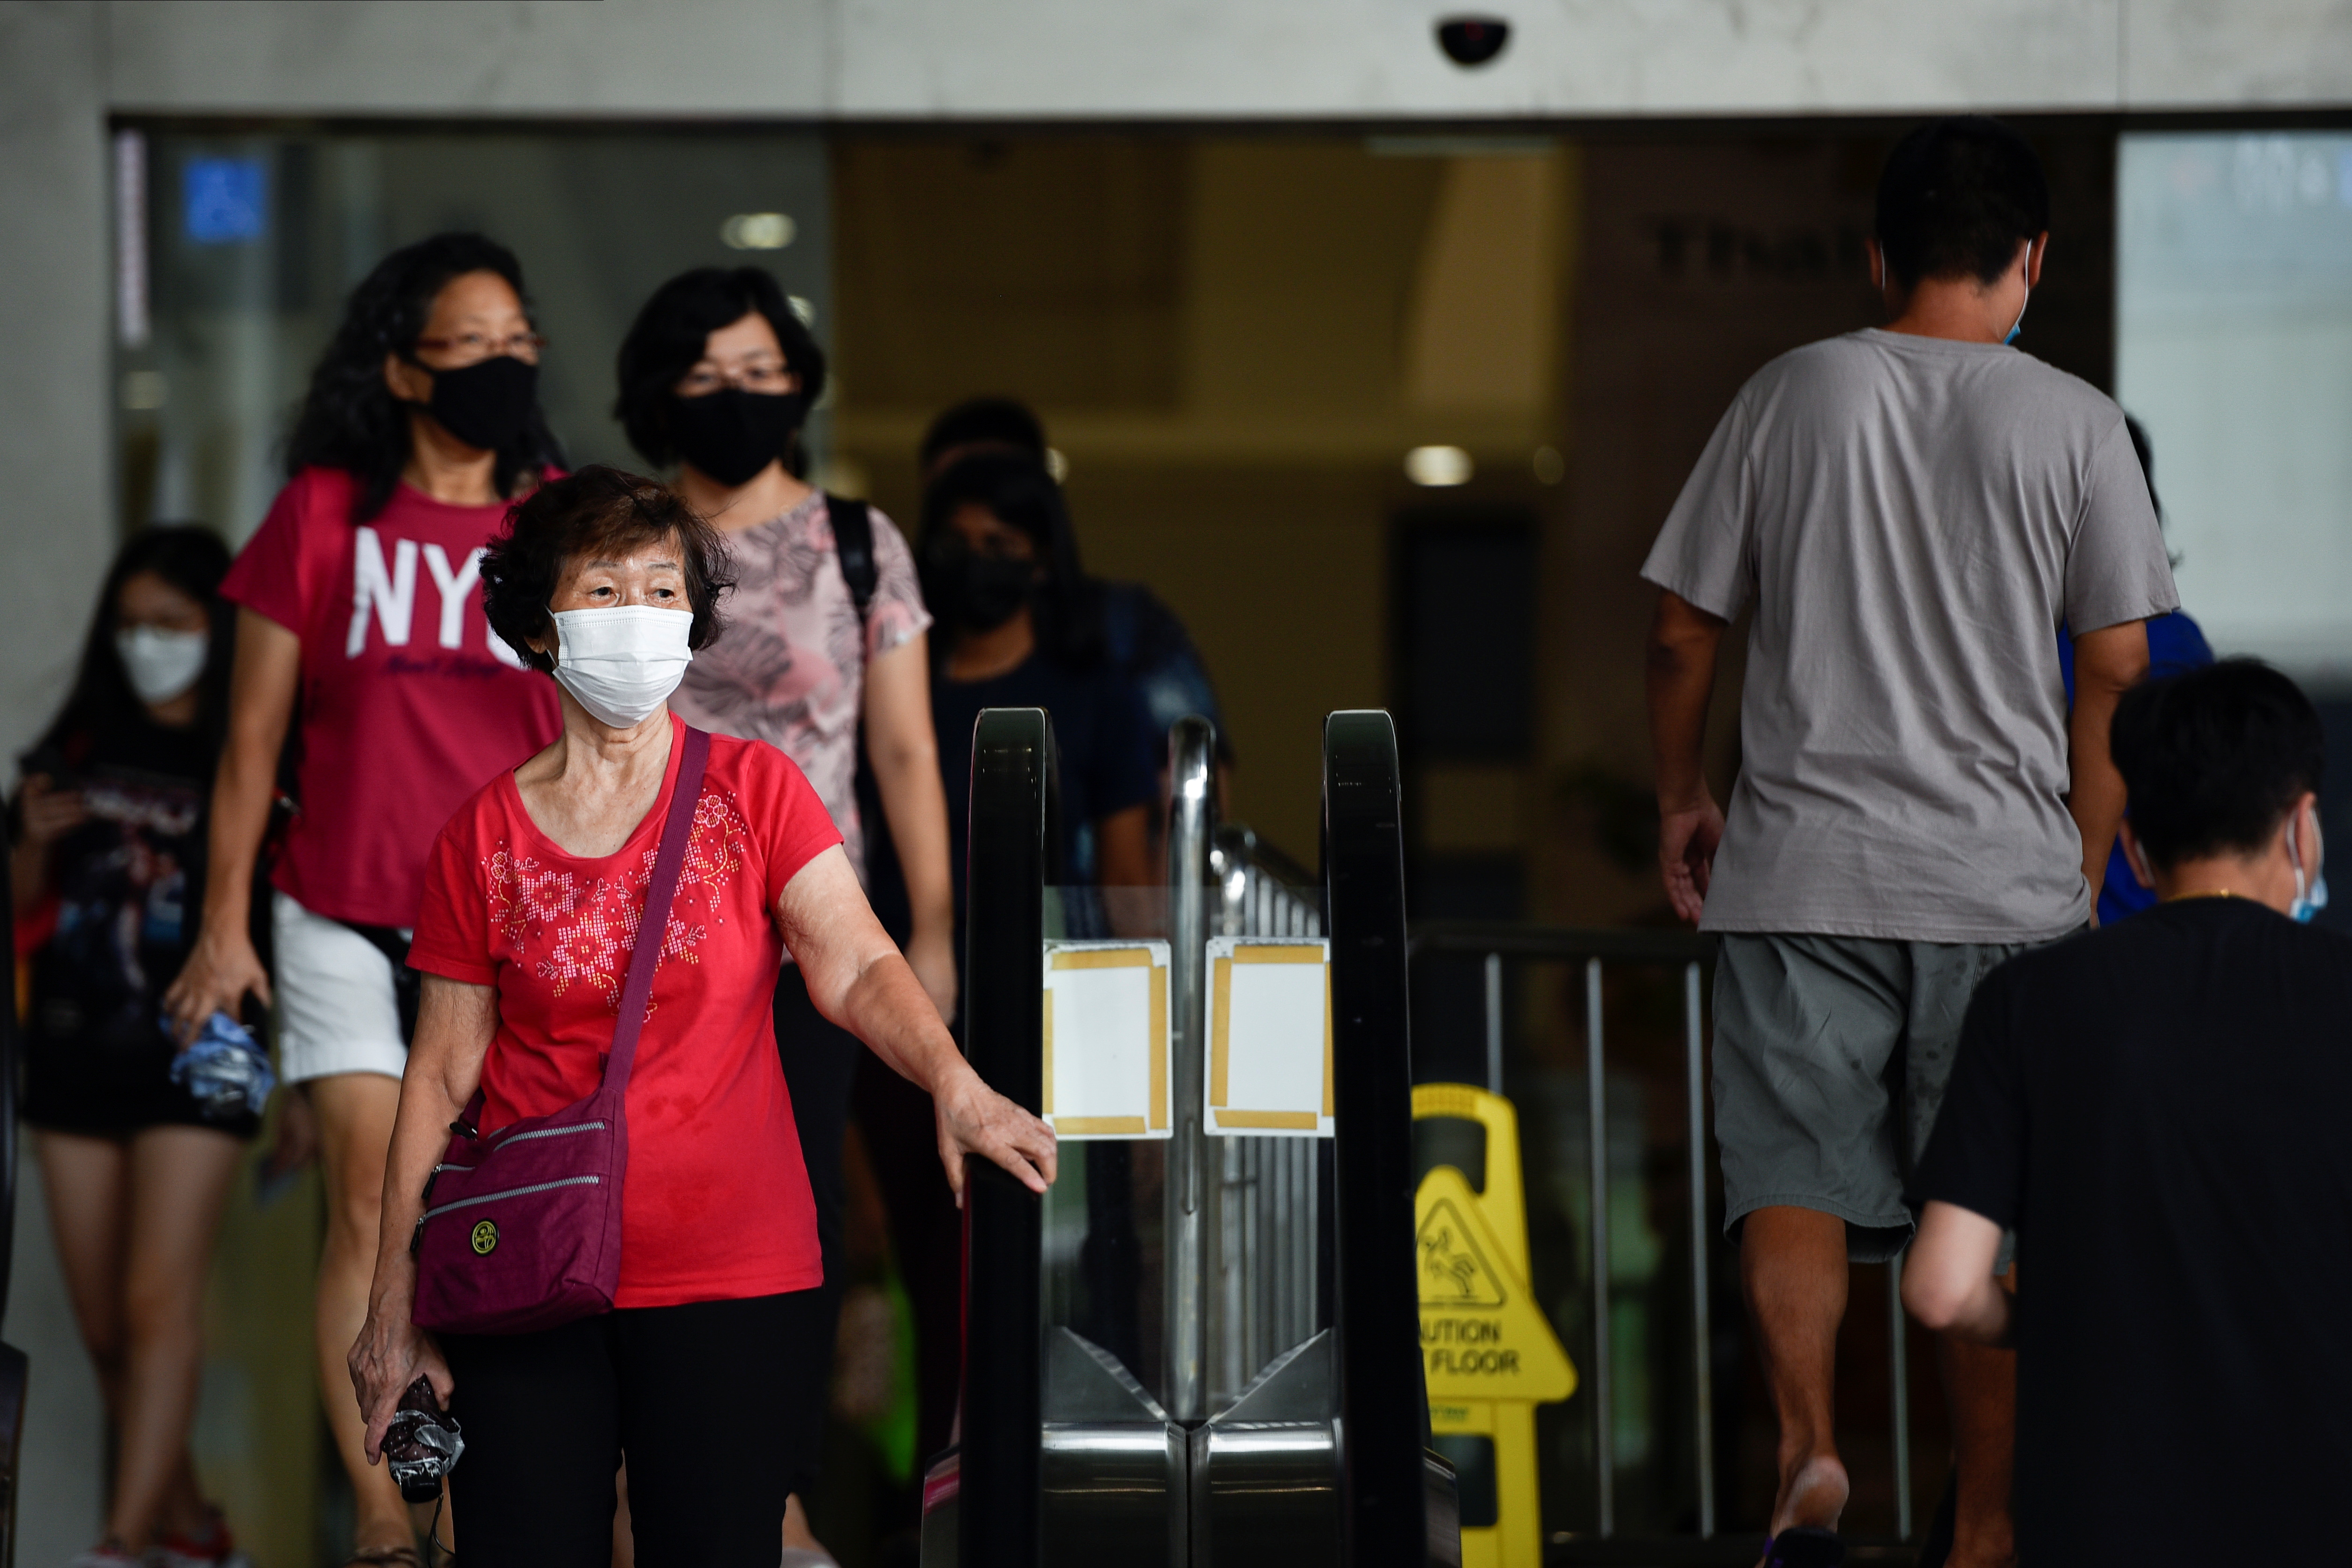 People wearing face masks walk out of a mall amid the coronavirus disease (COVID-19) outbreak in Singapore